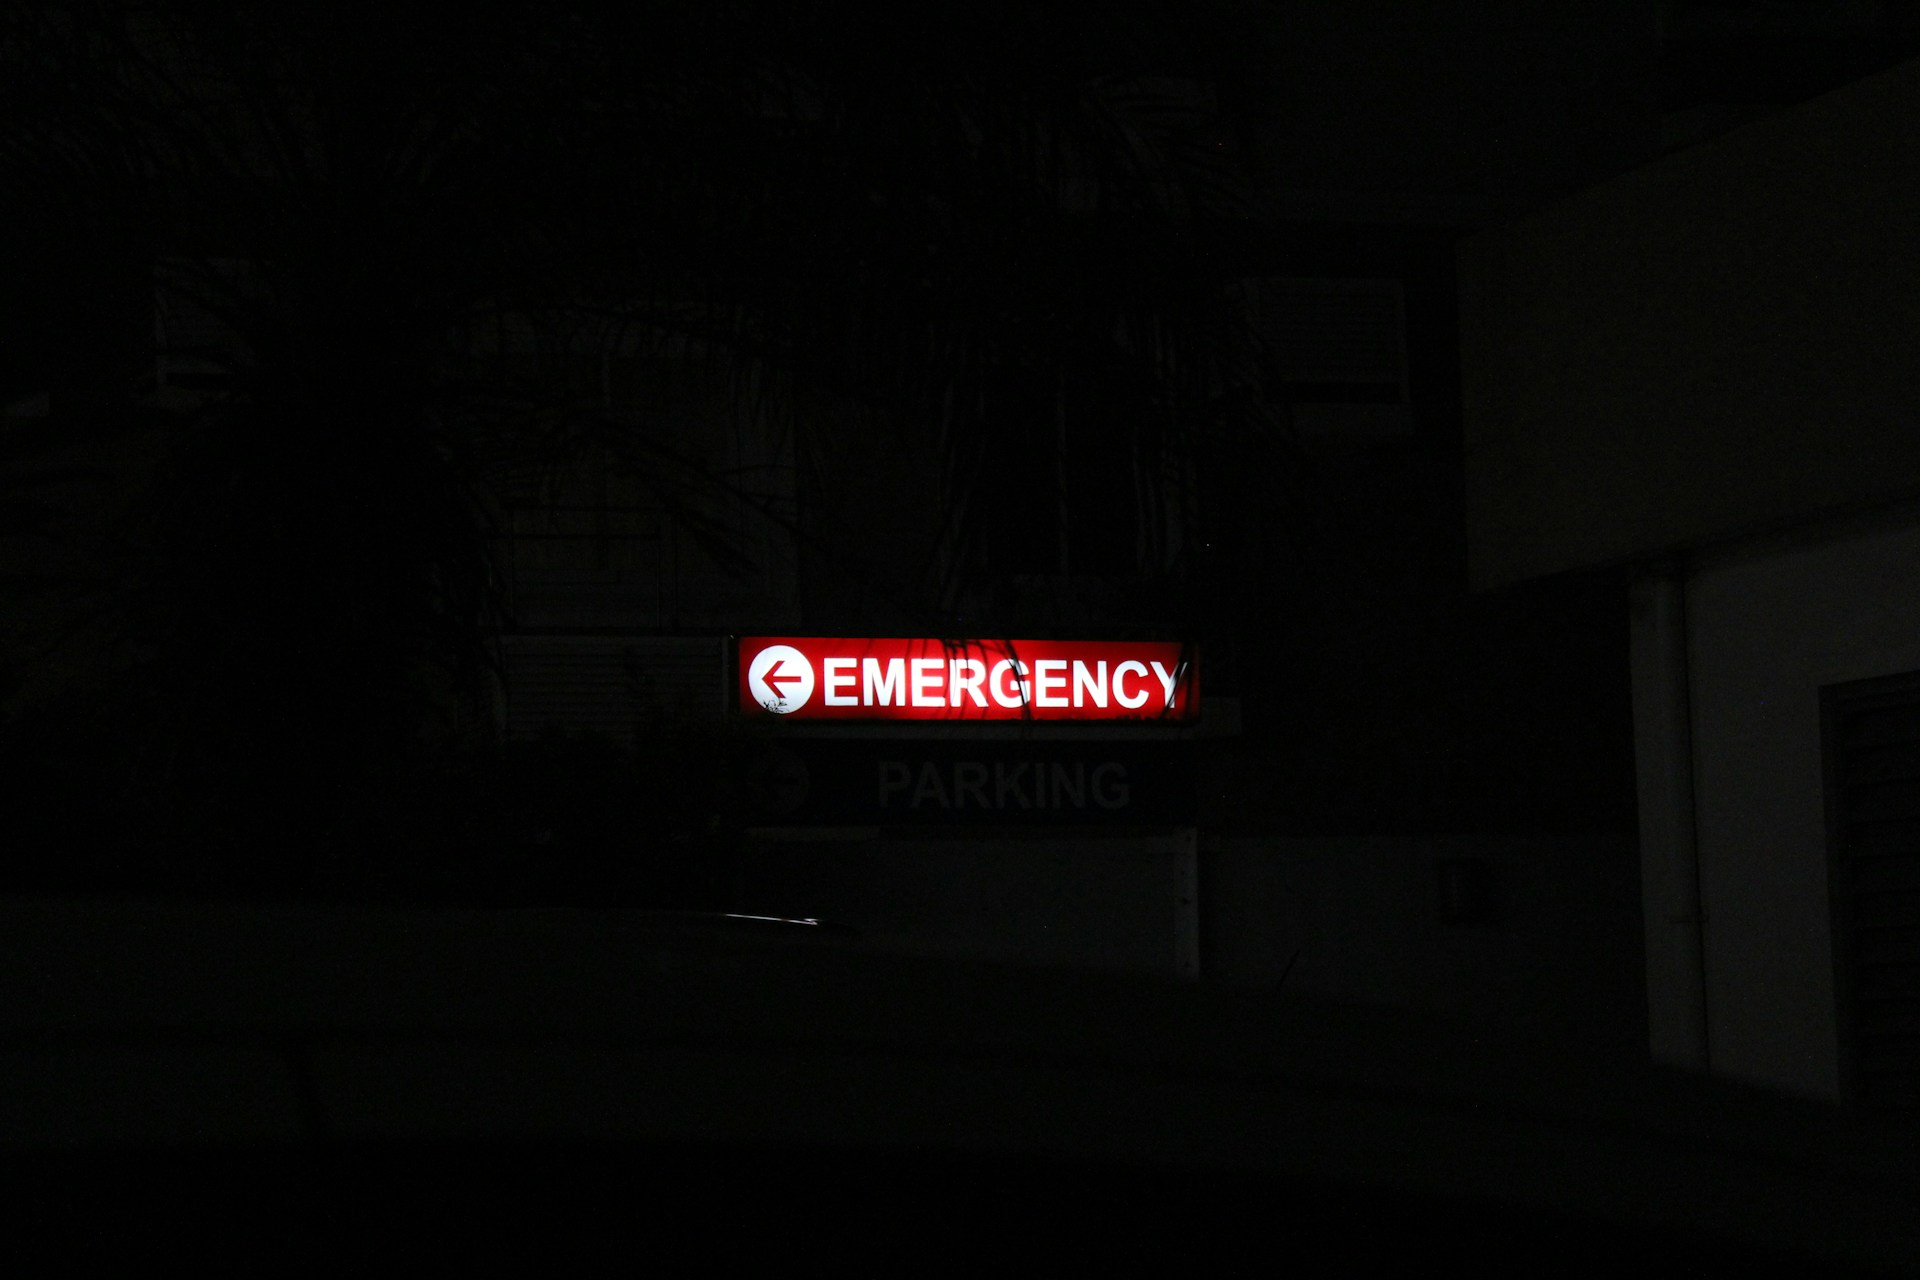 A red neon emergency sign